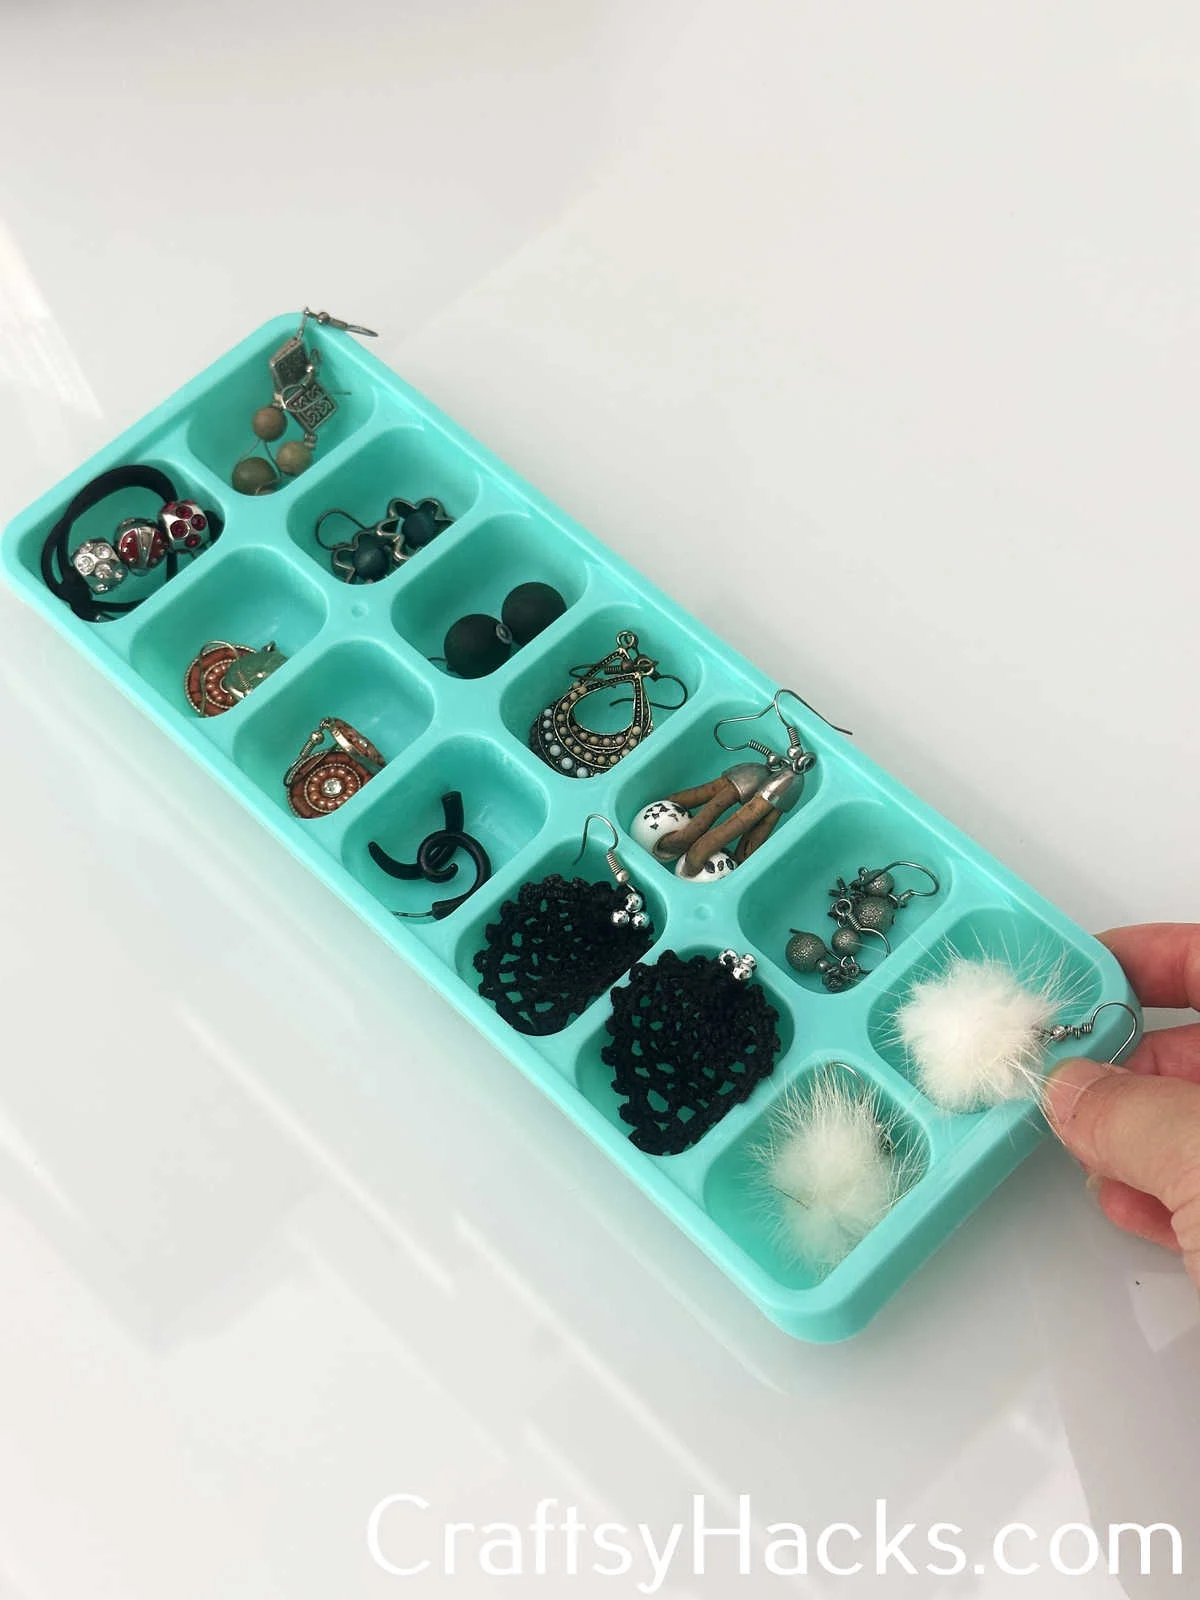 Pair Your Earrings Up in an Ice Cube Tray